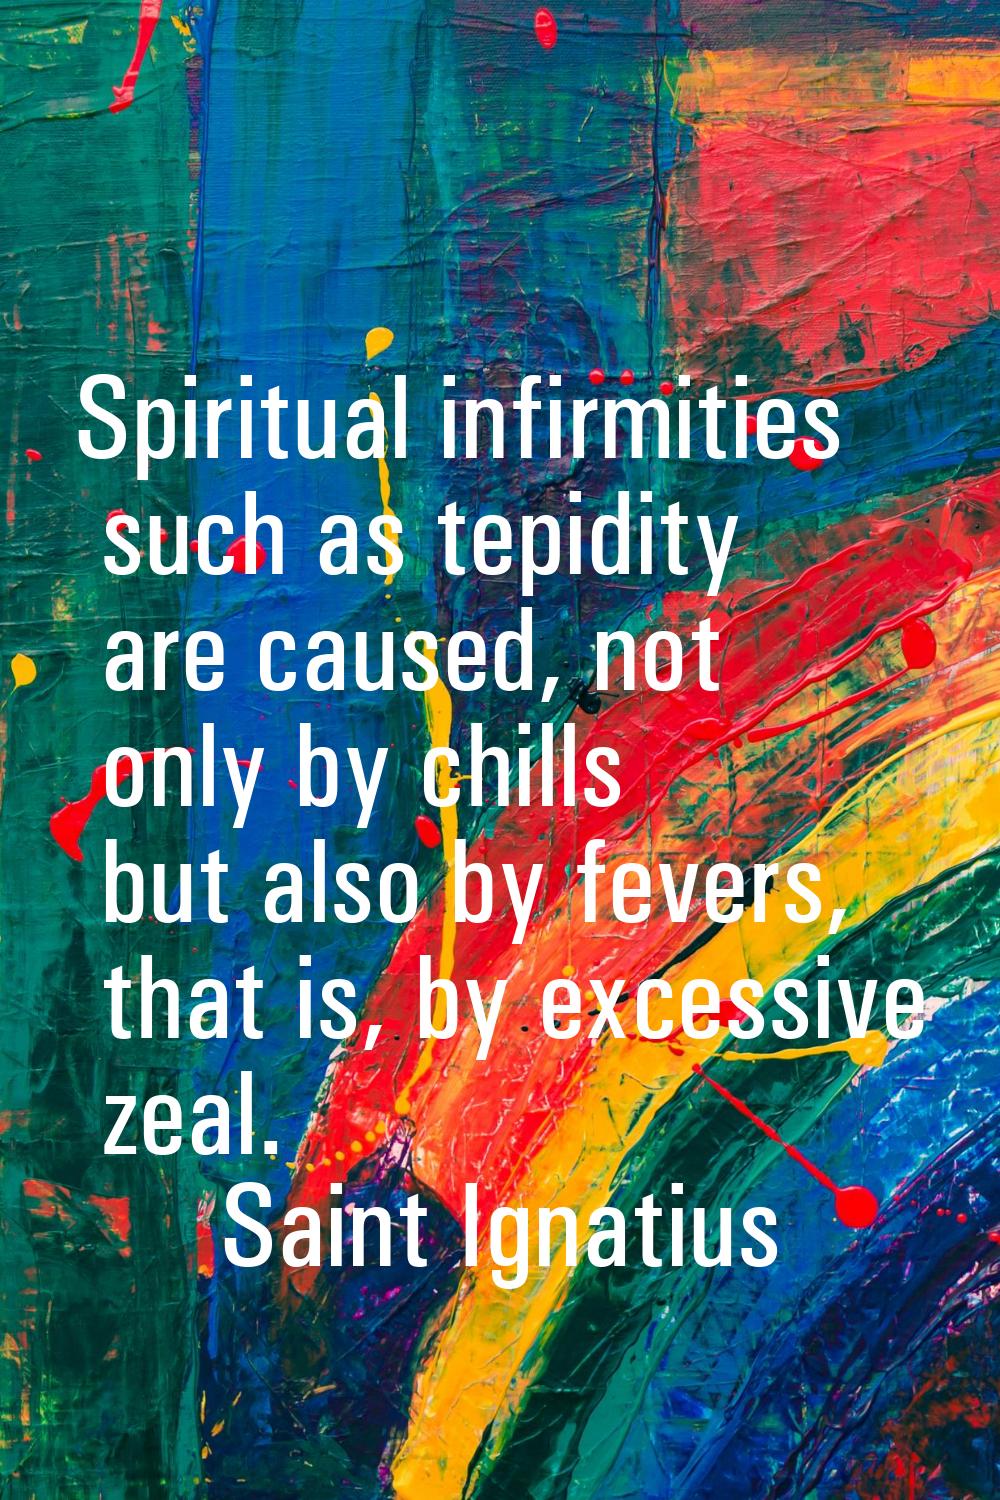 Spiritual infirmities such as tepidity are caused, not only by chills but also by fevers, that is, 